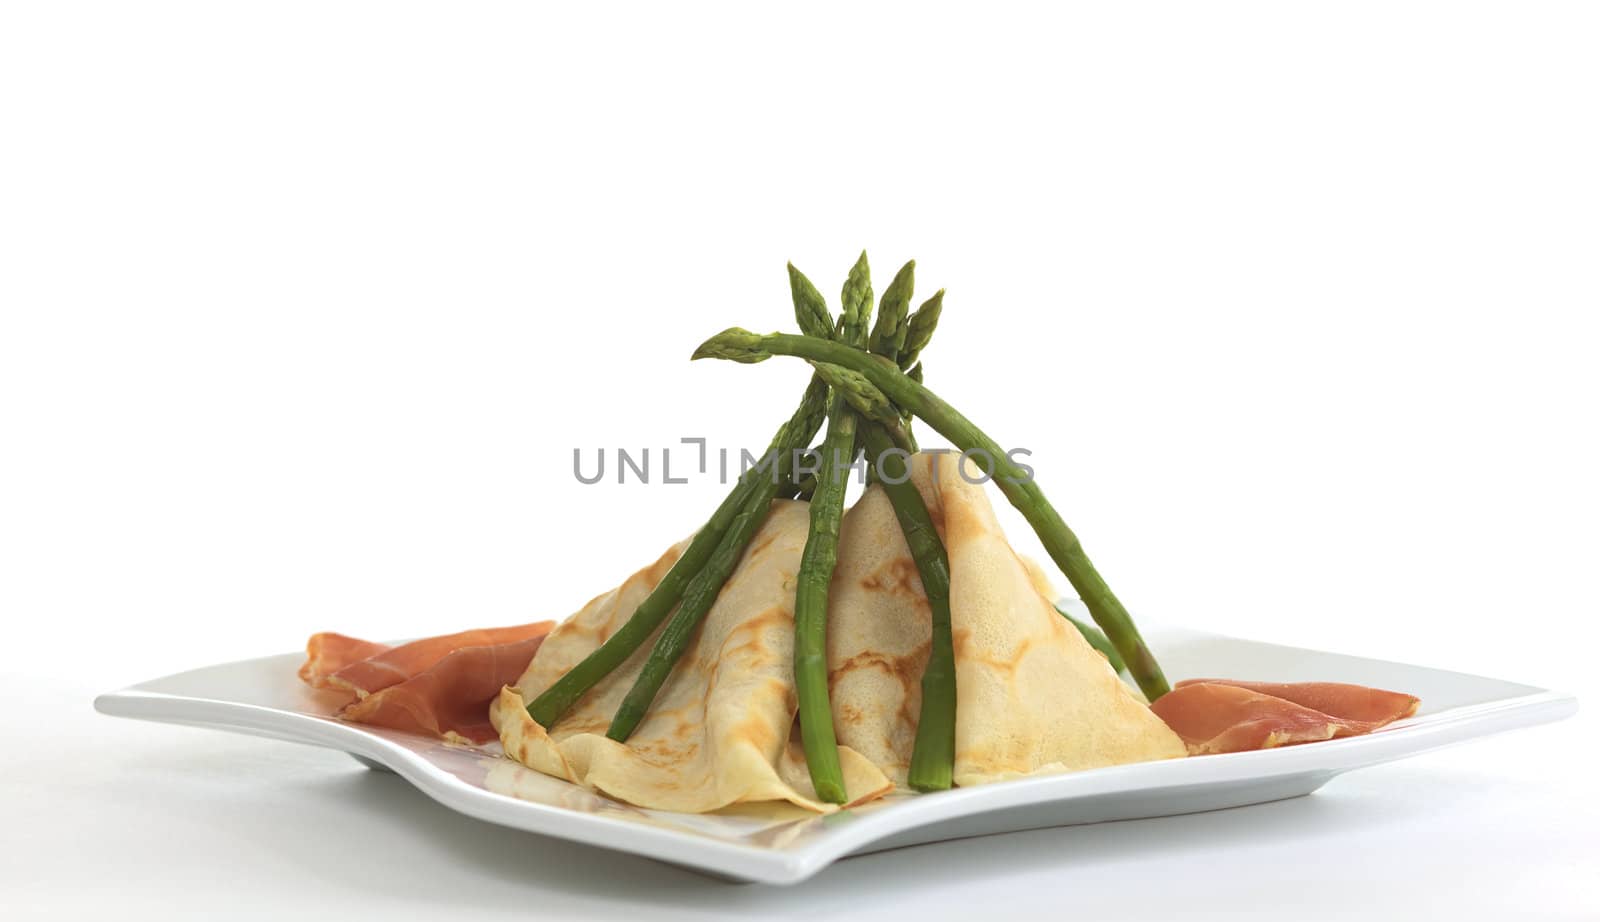 Crepes and Asparagus Tipi by ildi